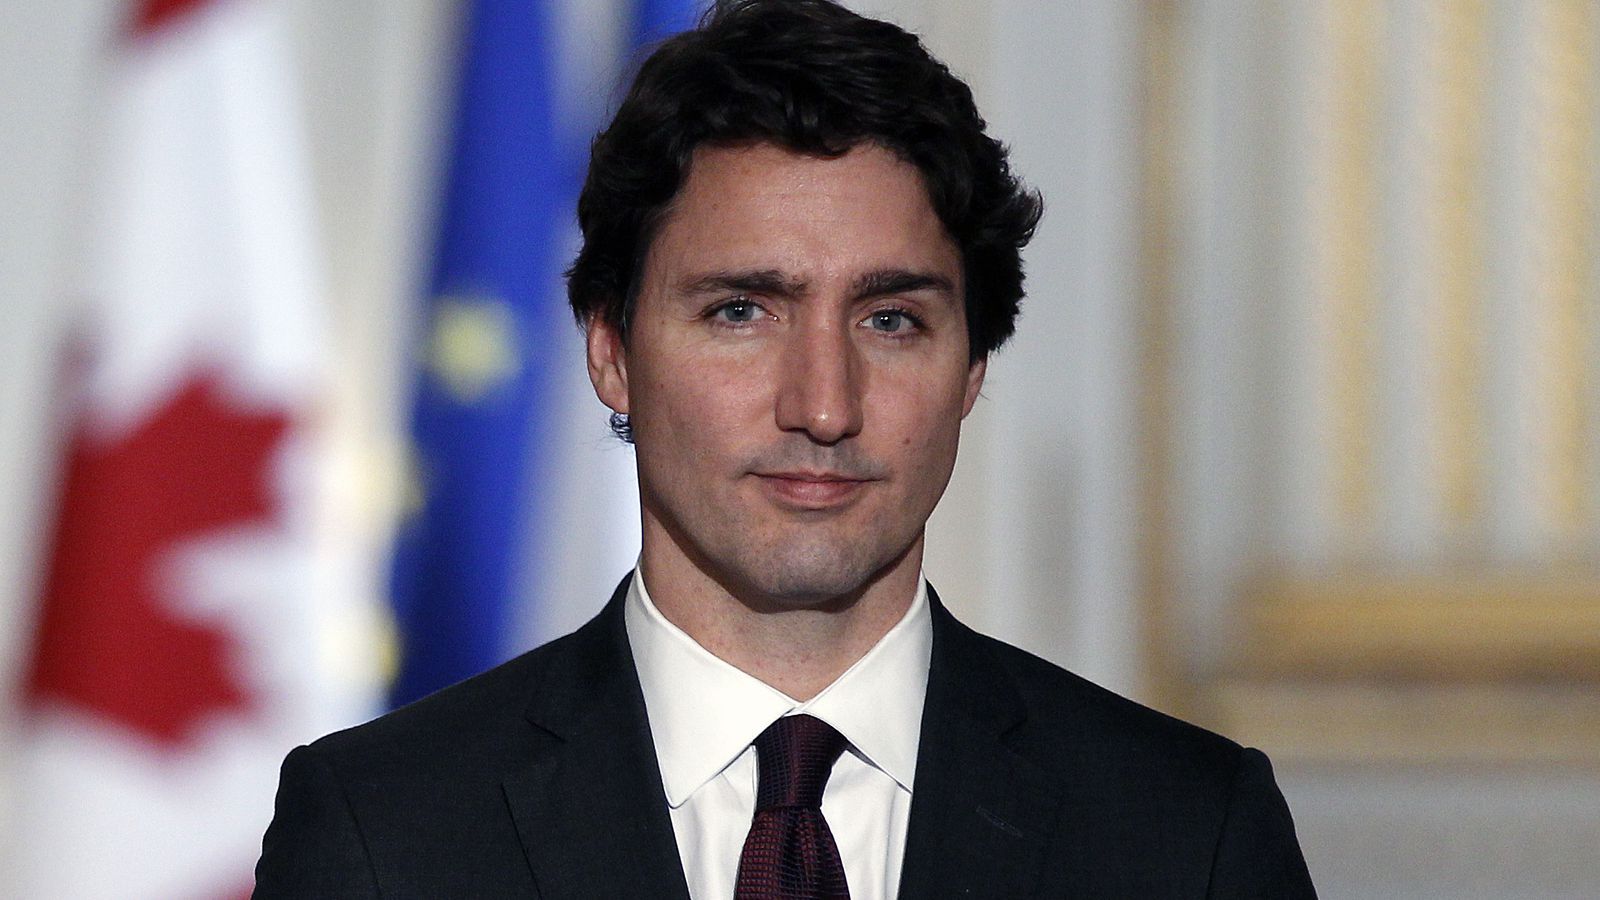 Justin Trudeau, Canada's dreamy prime minister, explained for Americans